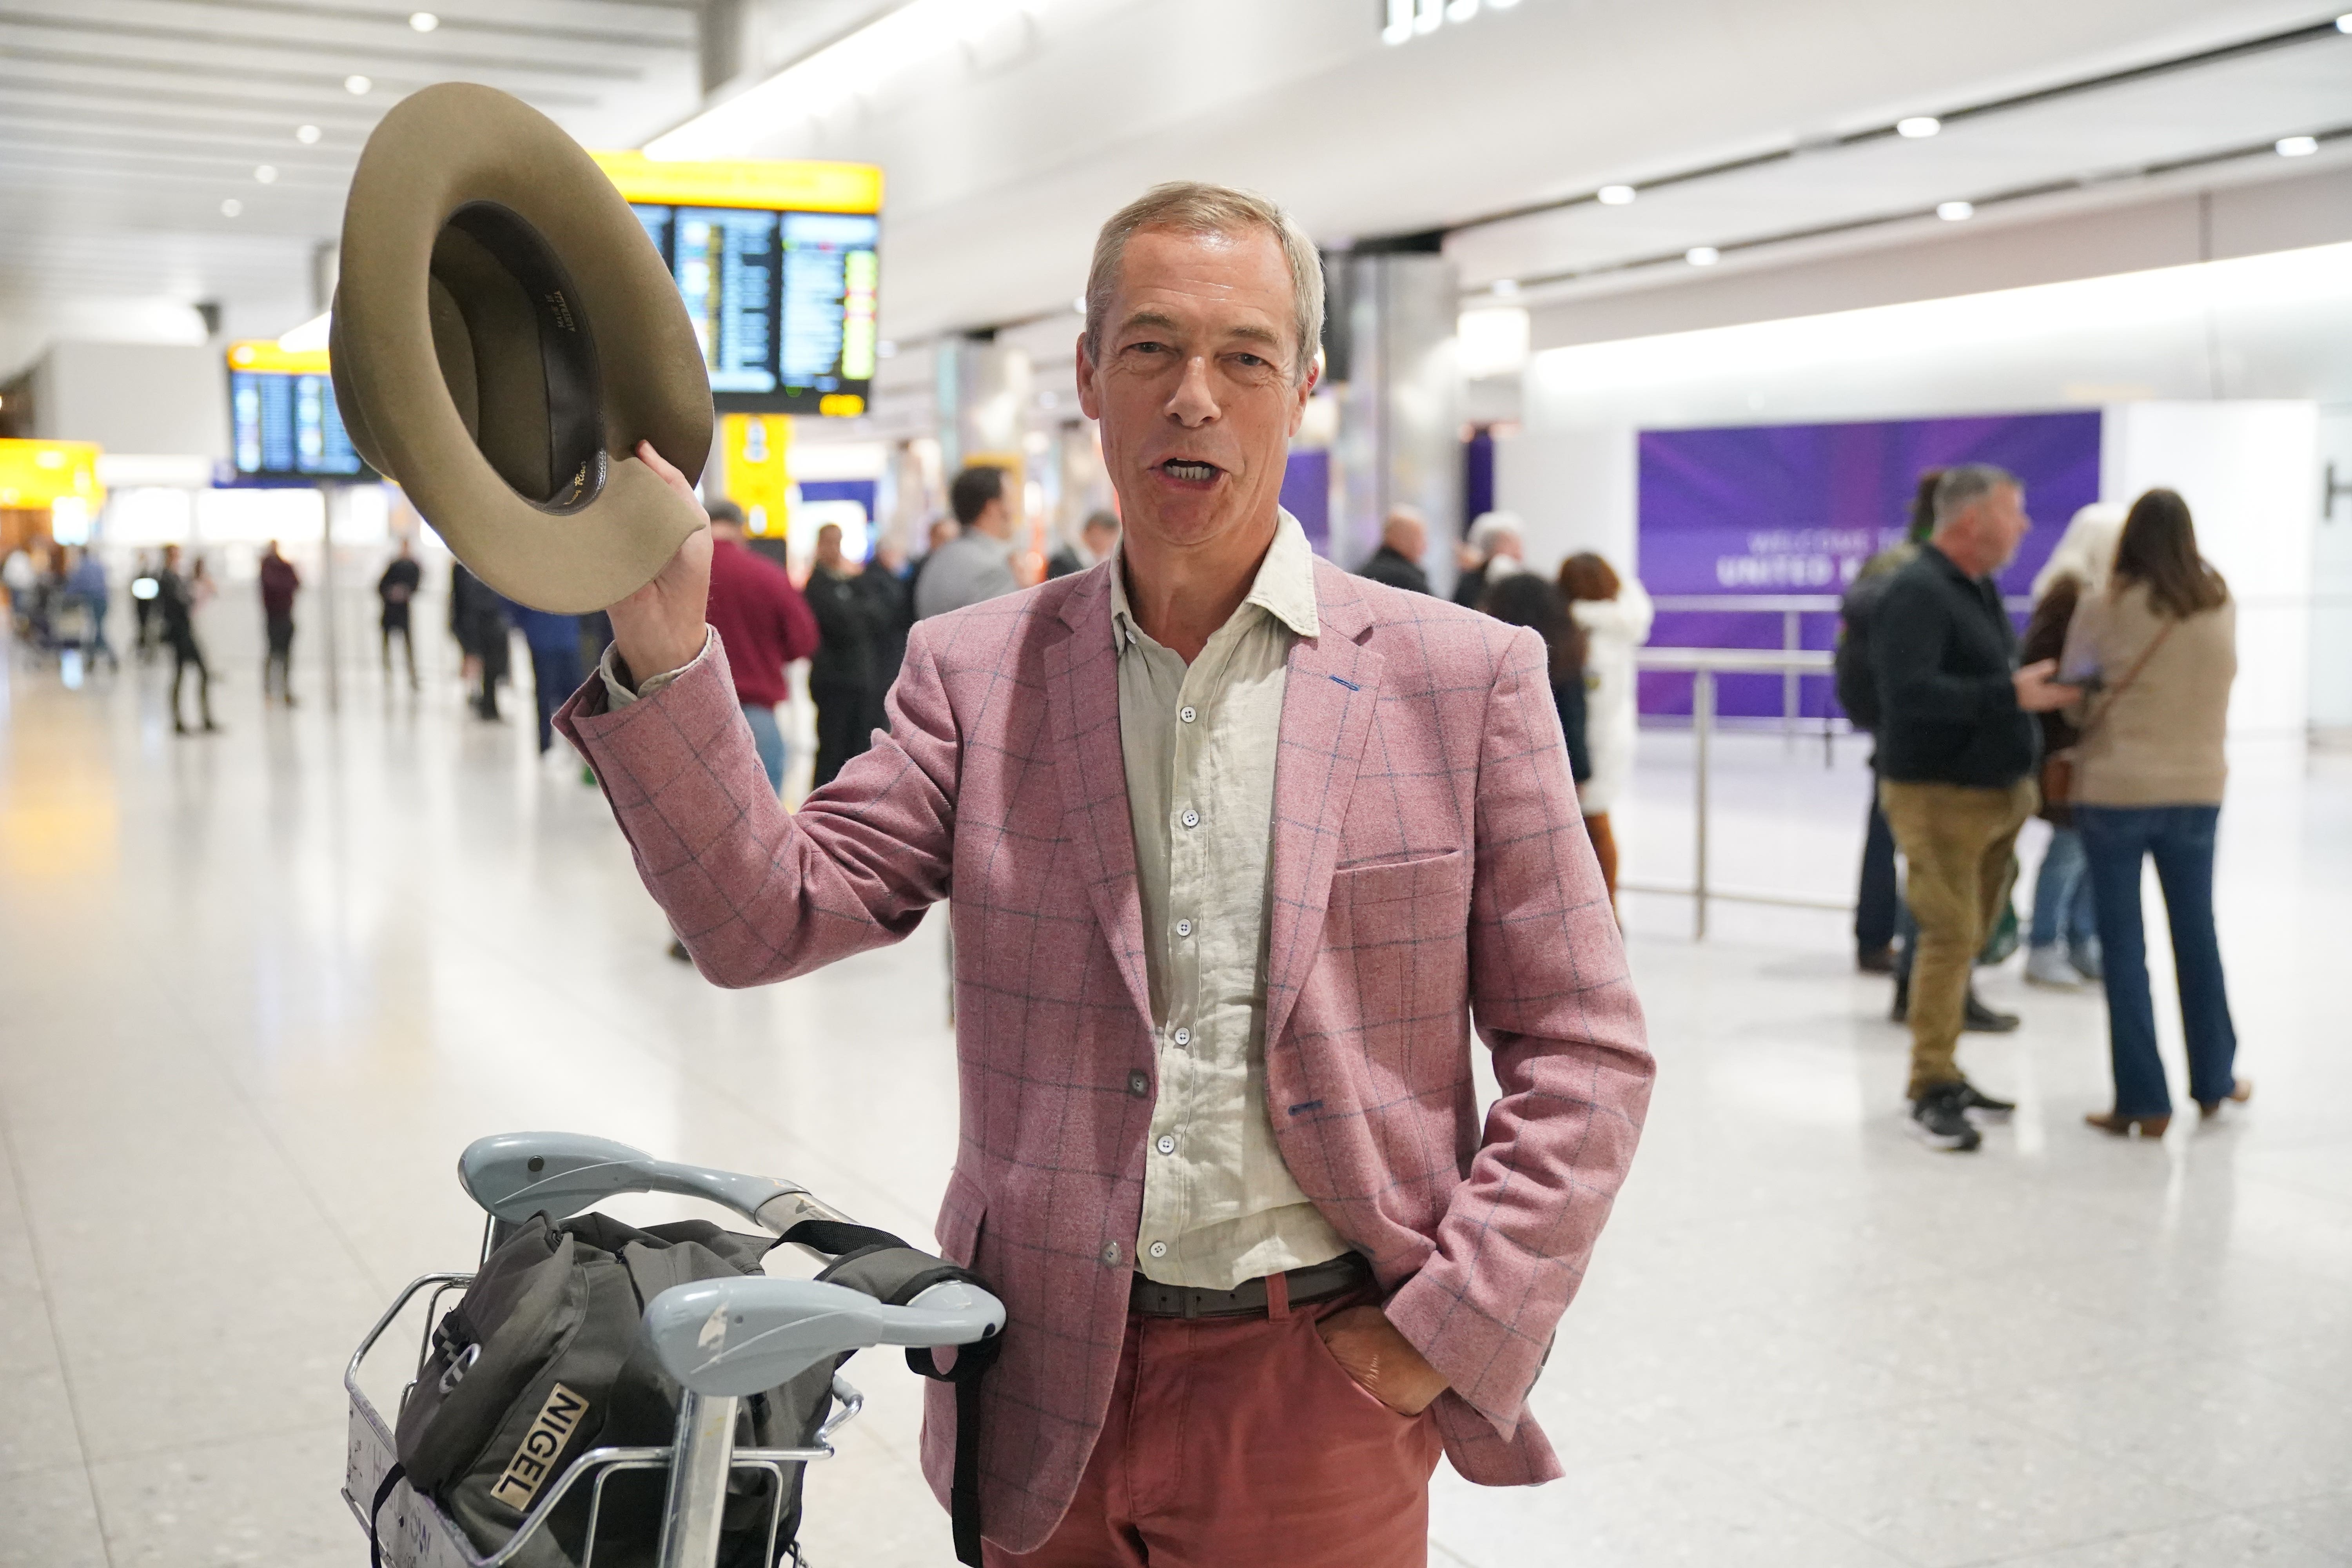 Nigel Farage arrives at Heathrow Airport after taking part in the ITV series I’m A Celebrity Get Me Out Of Here! (Jonathan Brady/PA)